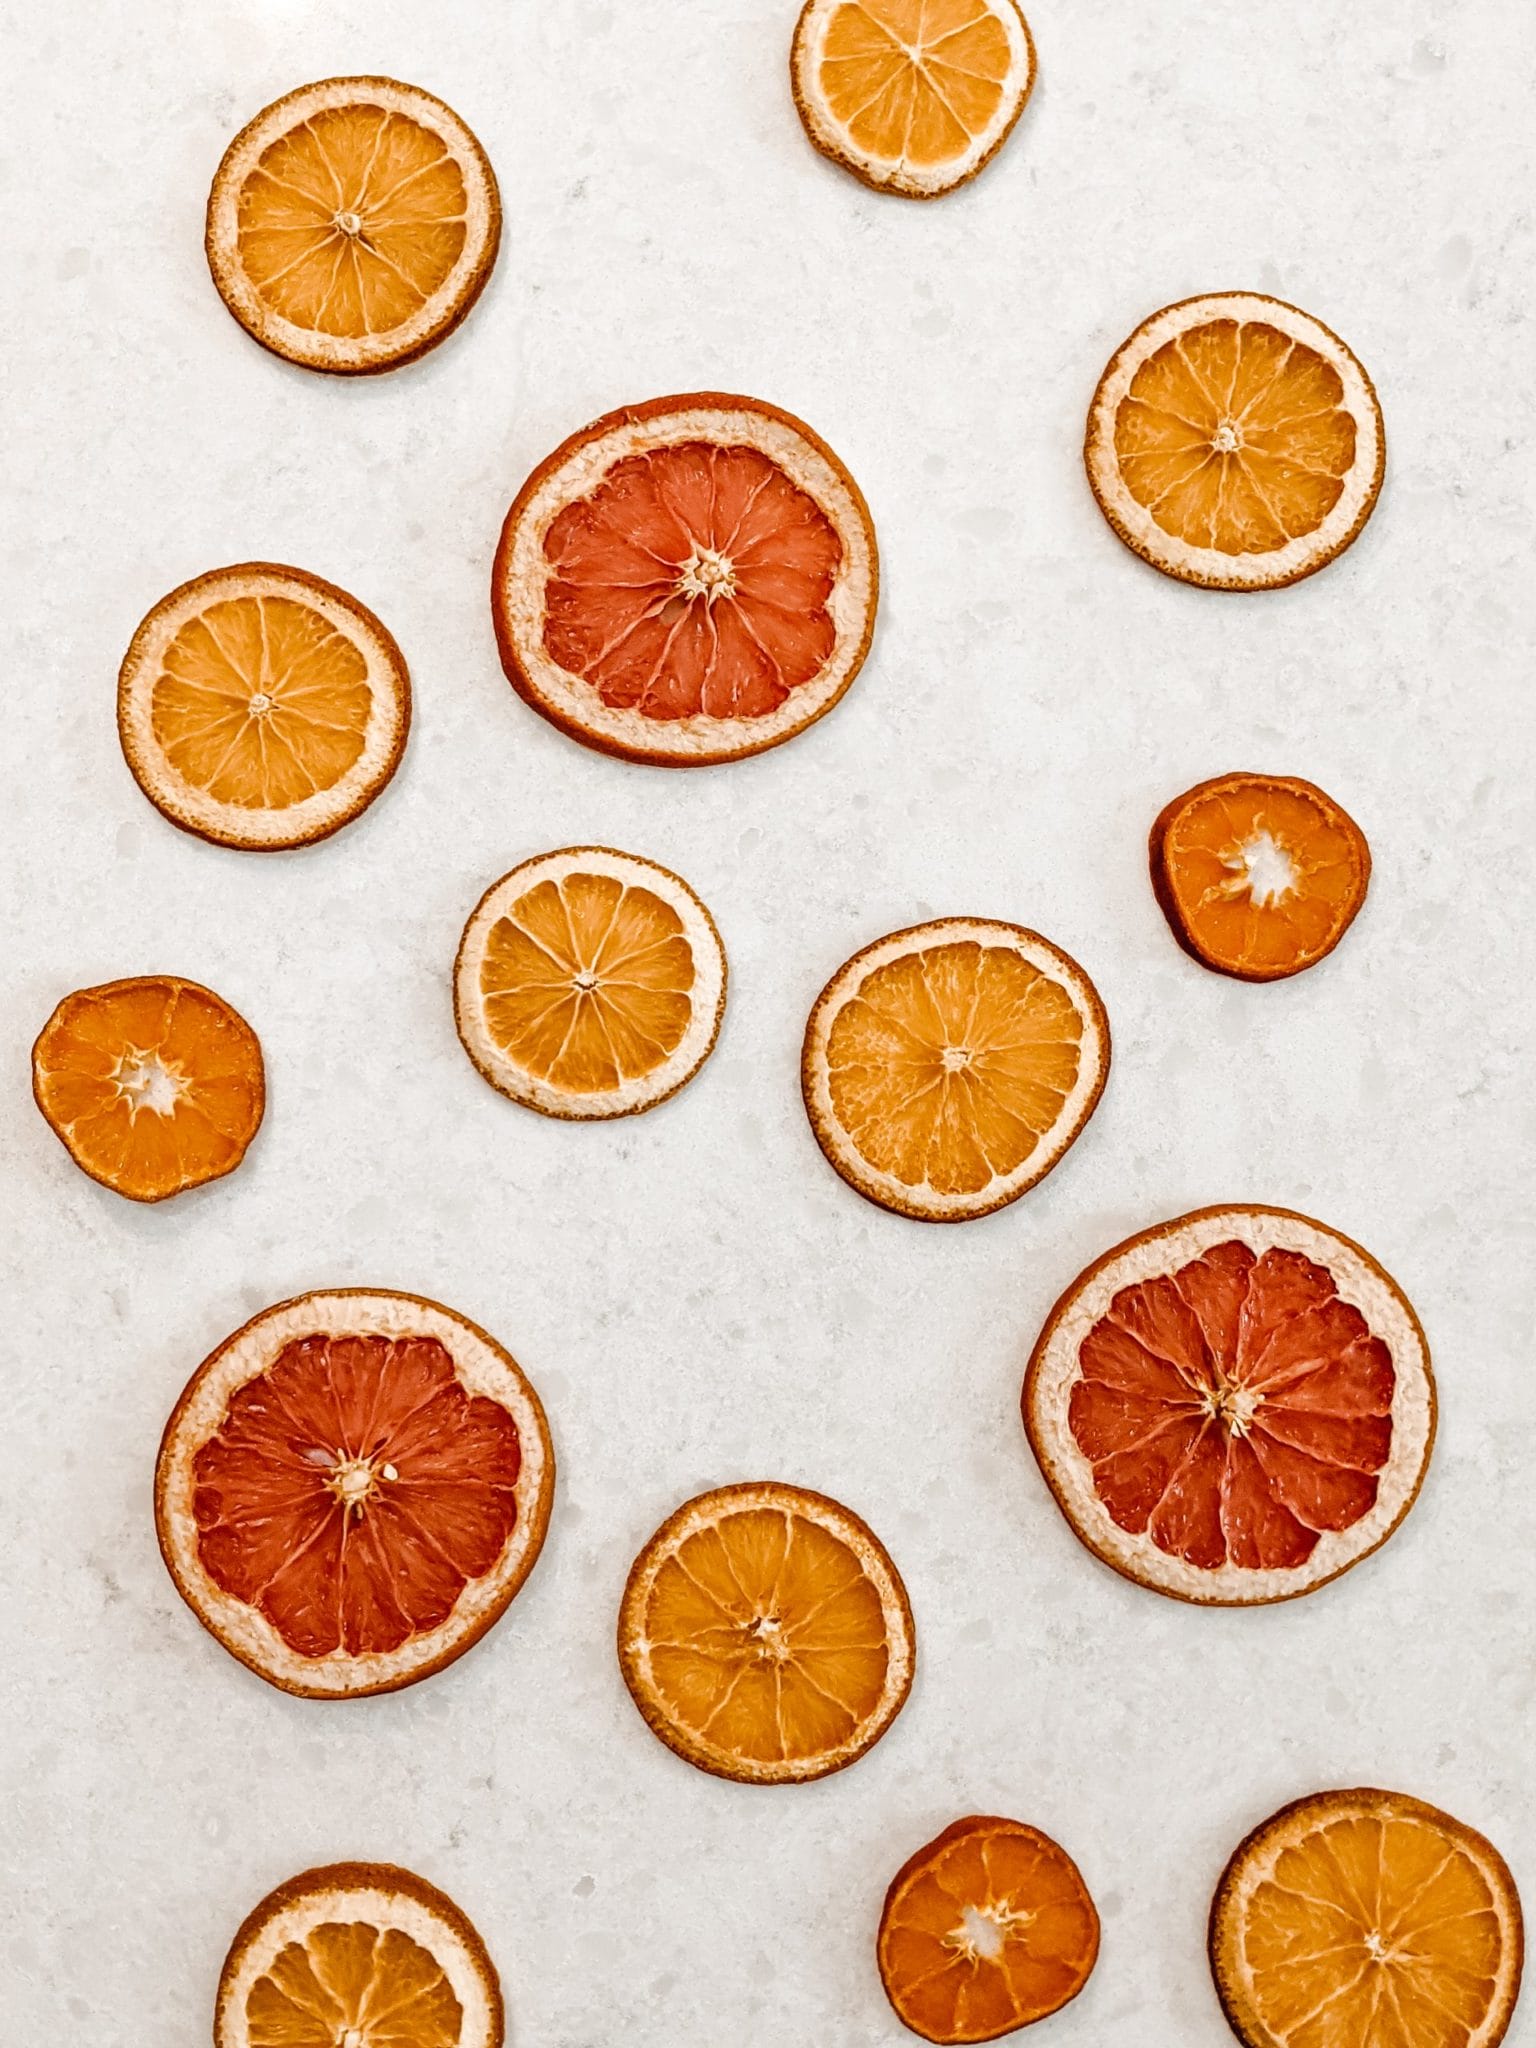 How To Dry Orange Slices for a Classic, Old-Timey Christmas Look